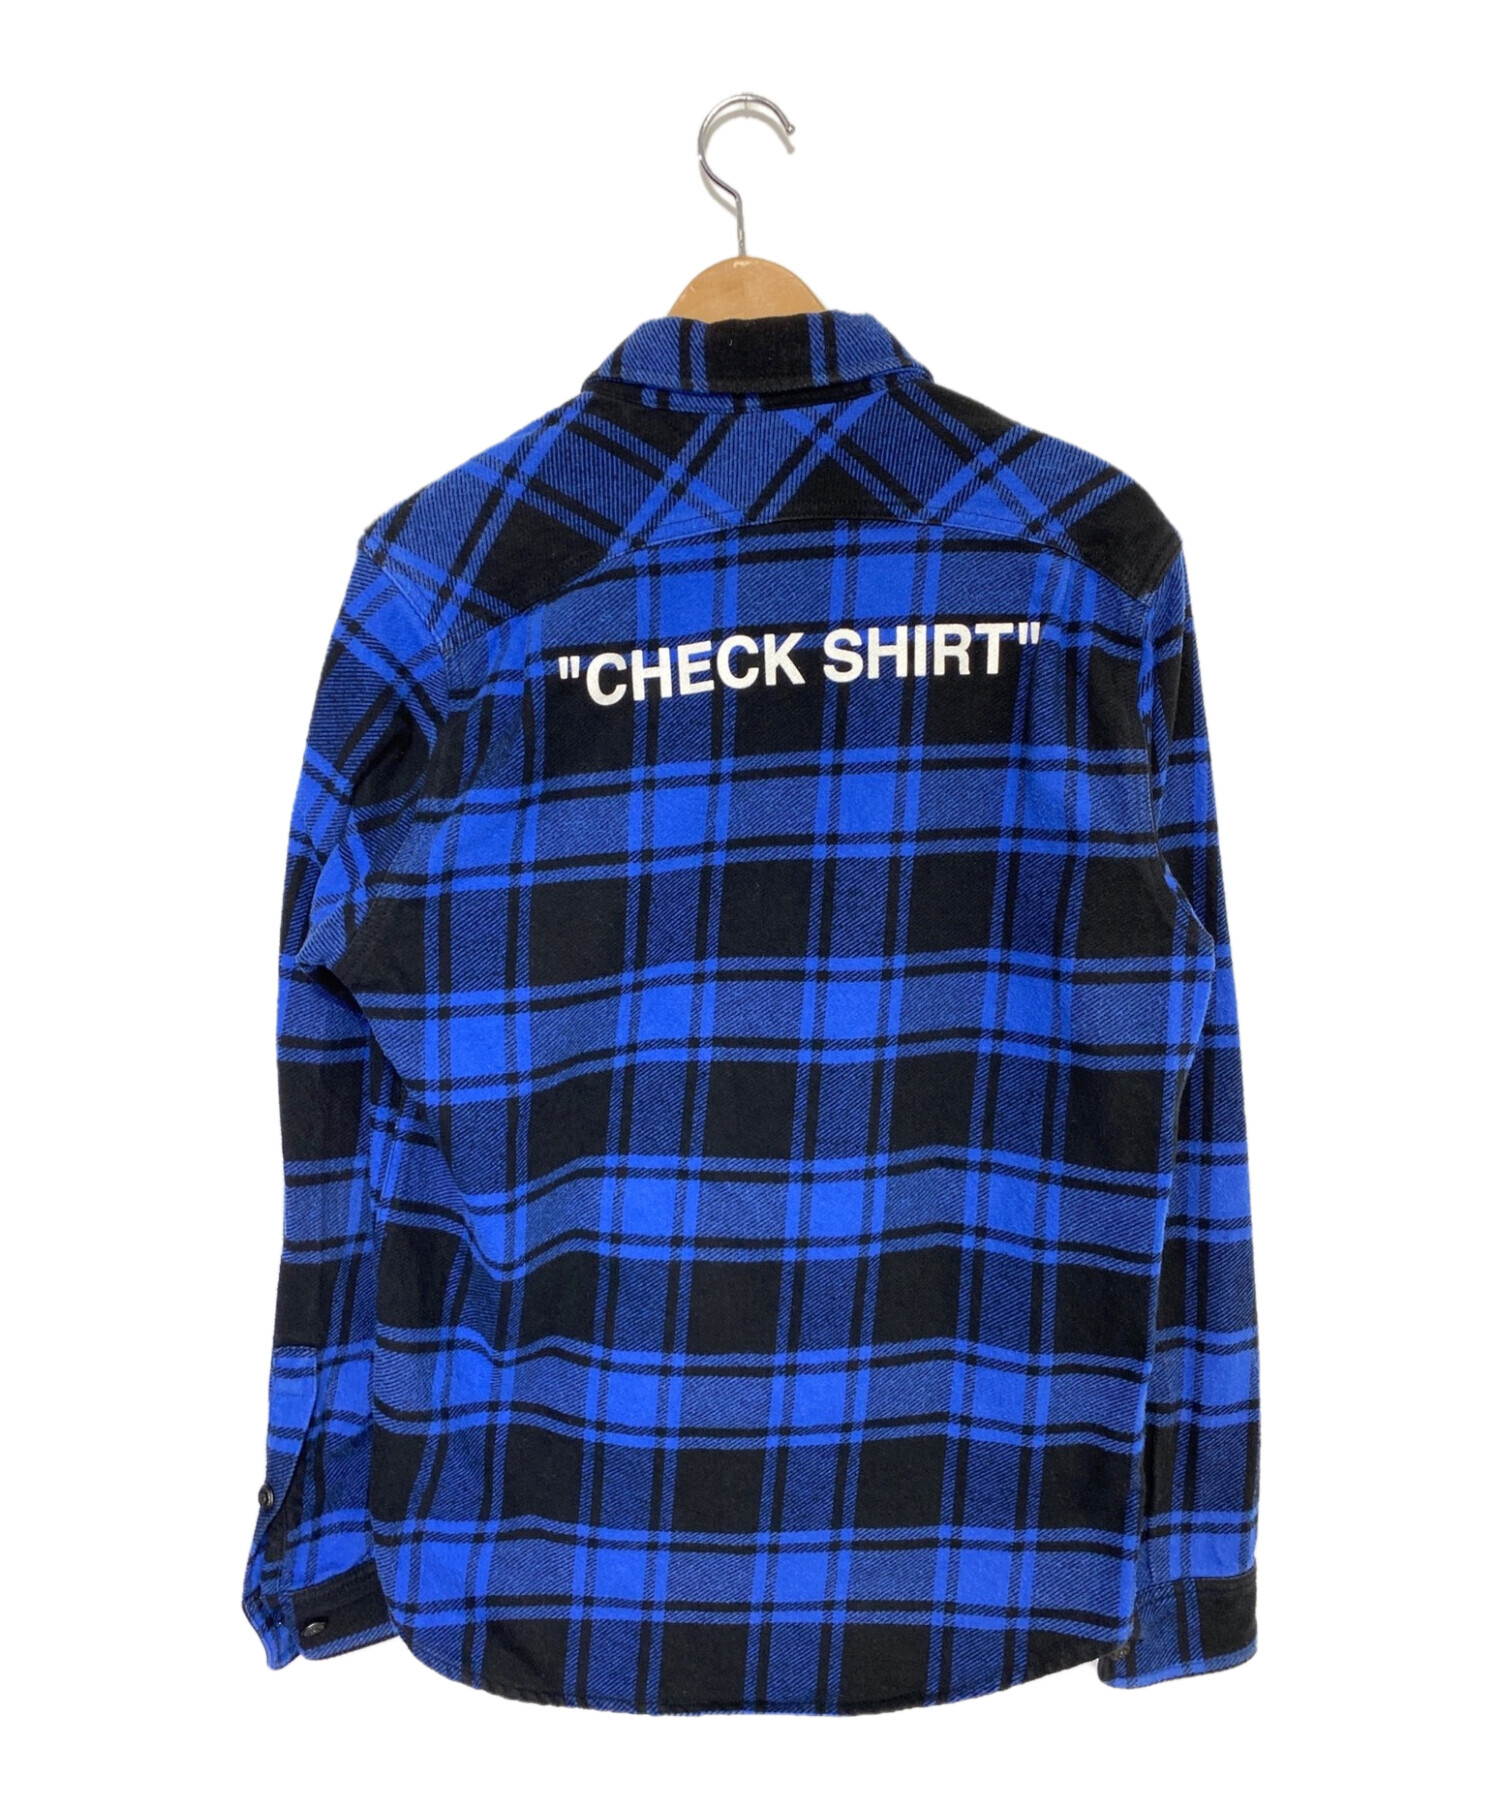 OFF-WHITE 18AW QUOTE FLANNEL SHIRT